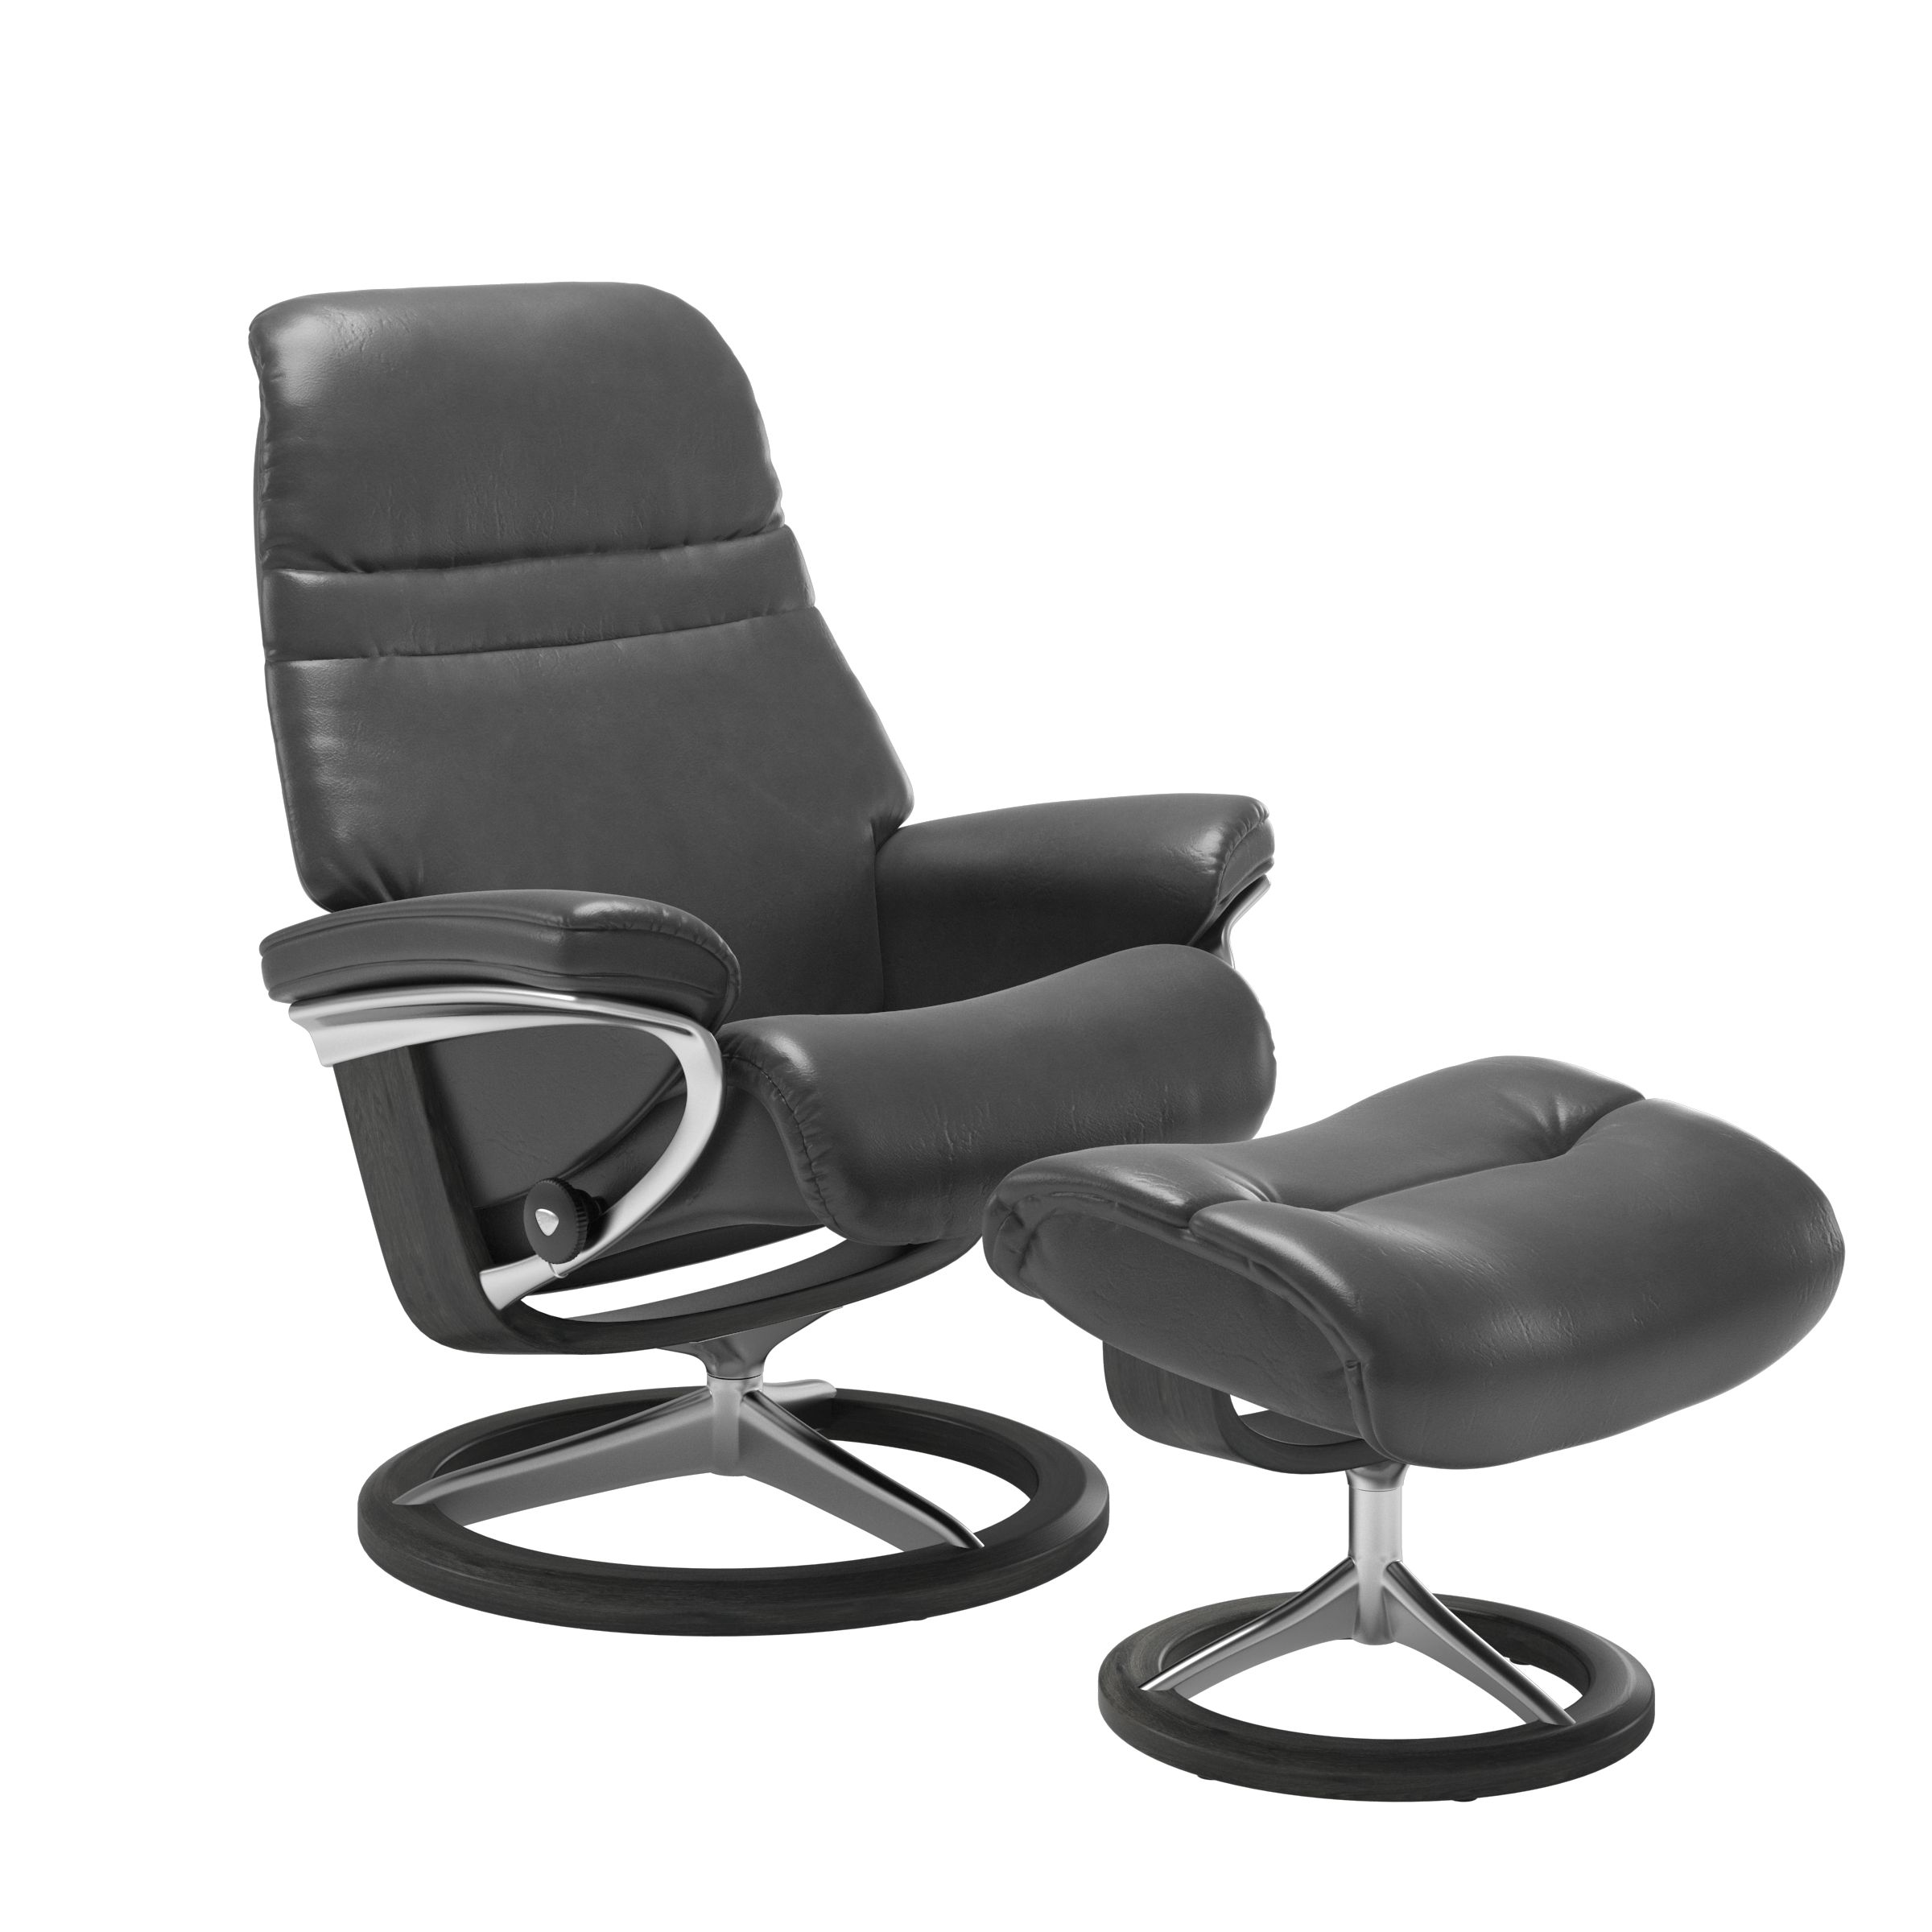 Stressless Sunrise Small Recliner and Ottoman with Signature Base